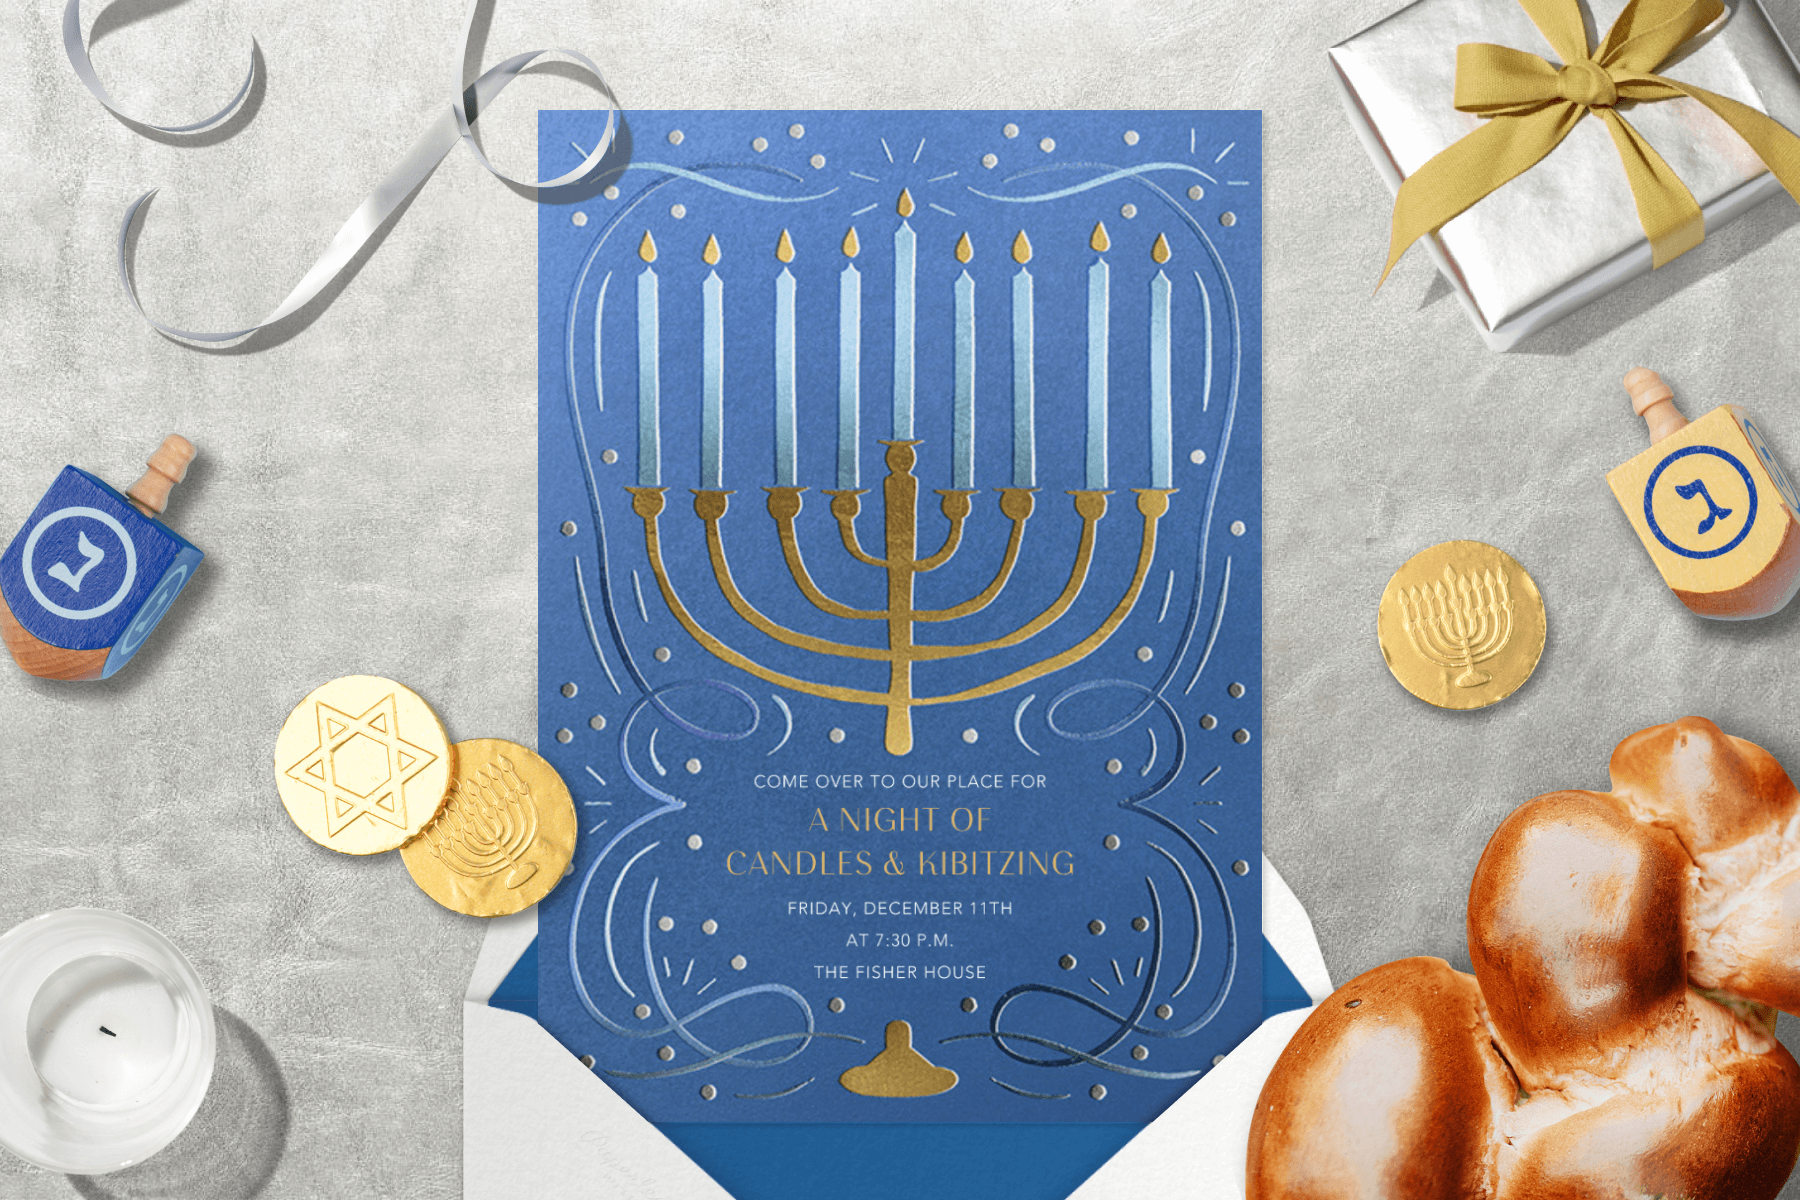 A Hanukkah invitation featuring a gold menorah illustration surrounded by party items like a dreidl, candles, and challah bread.